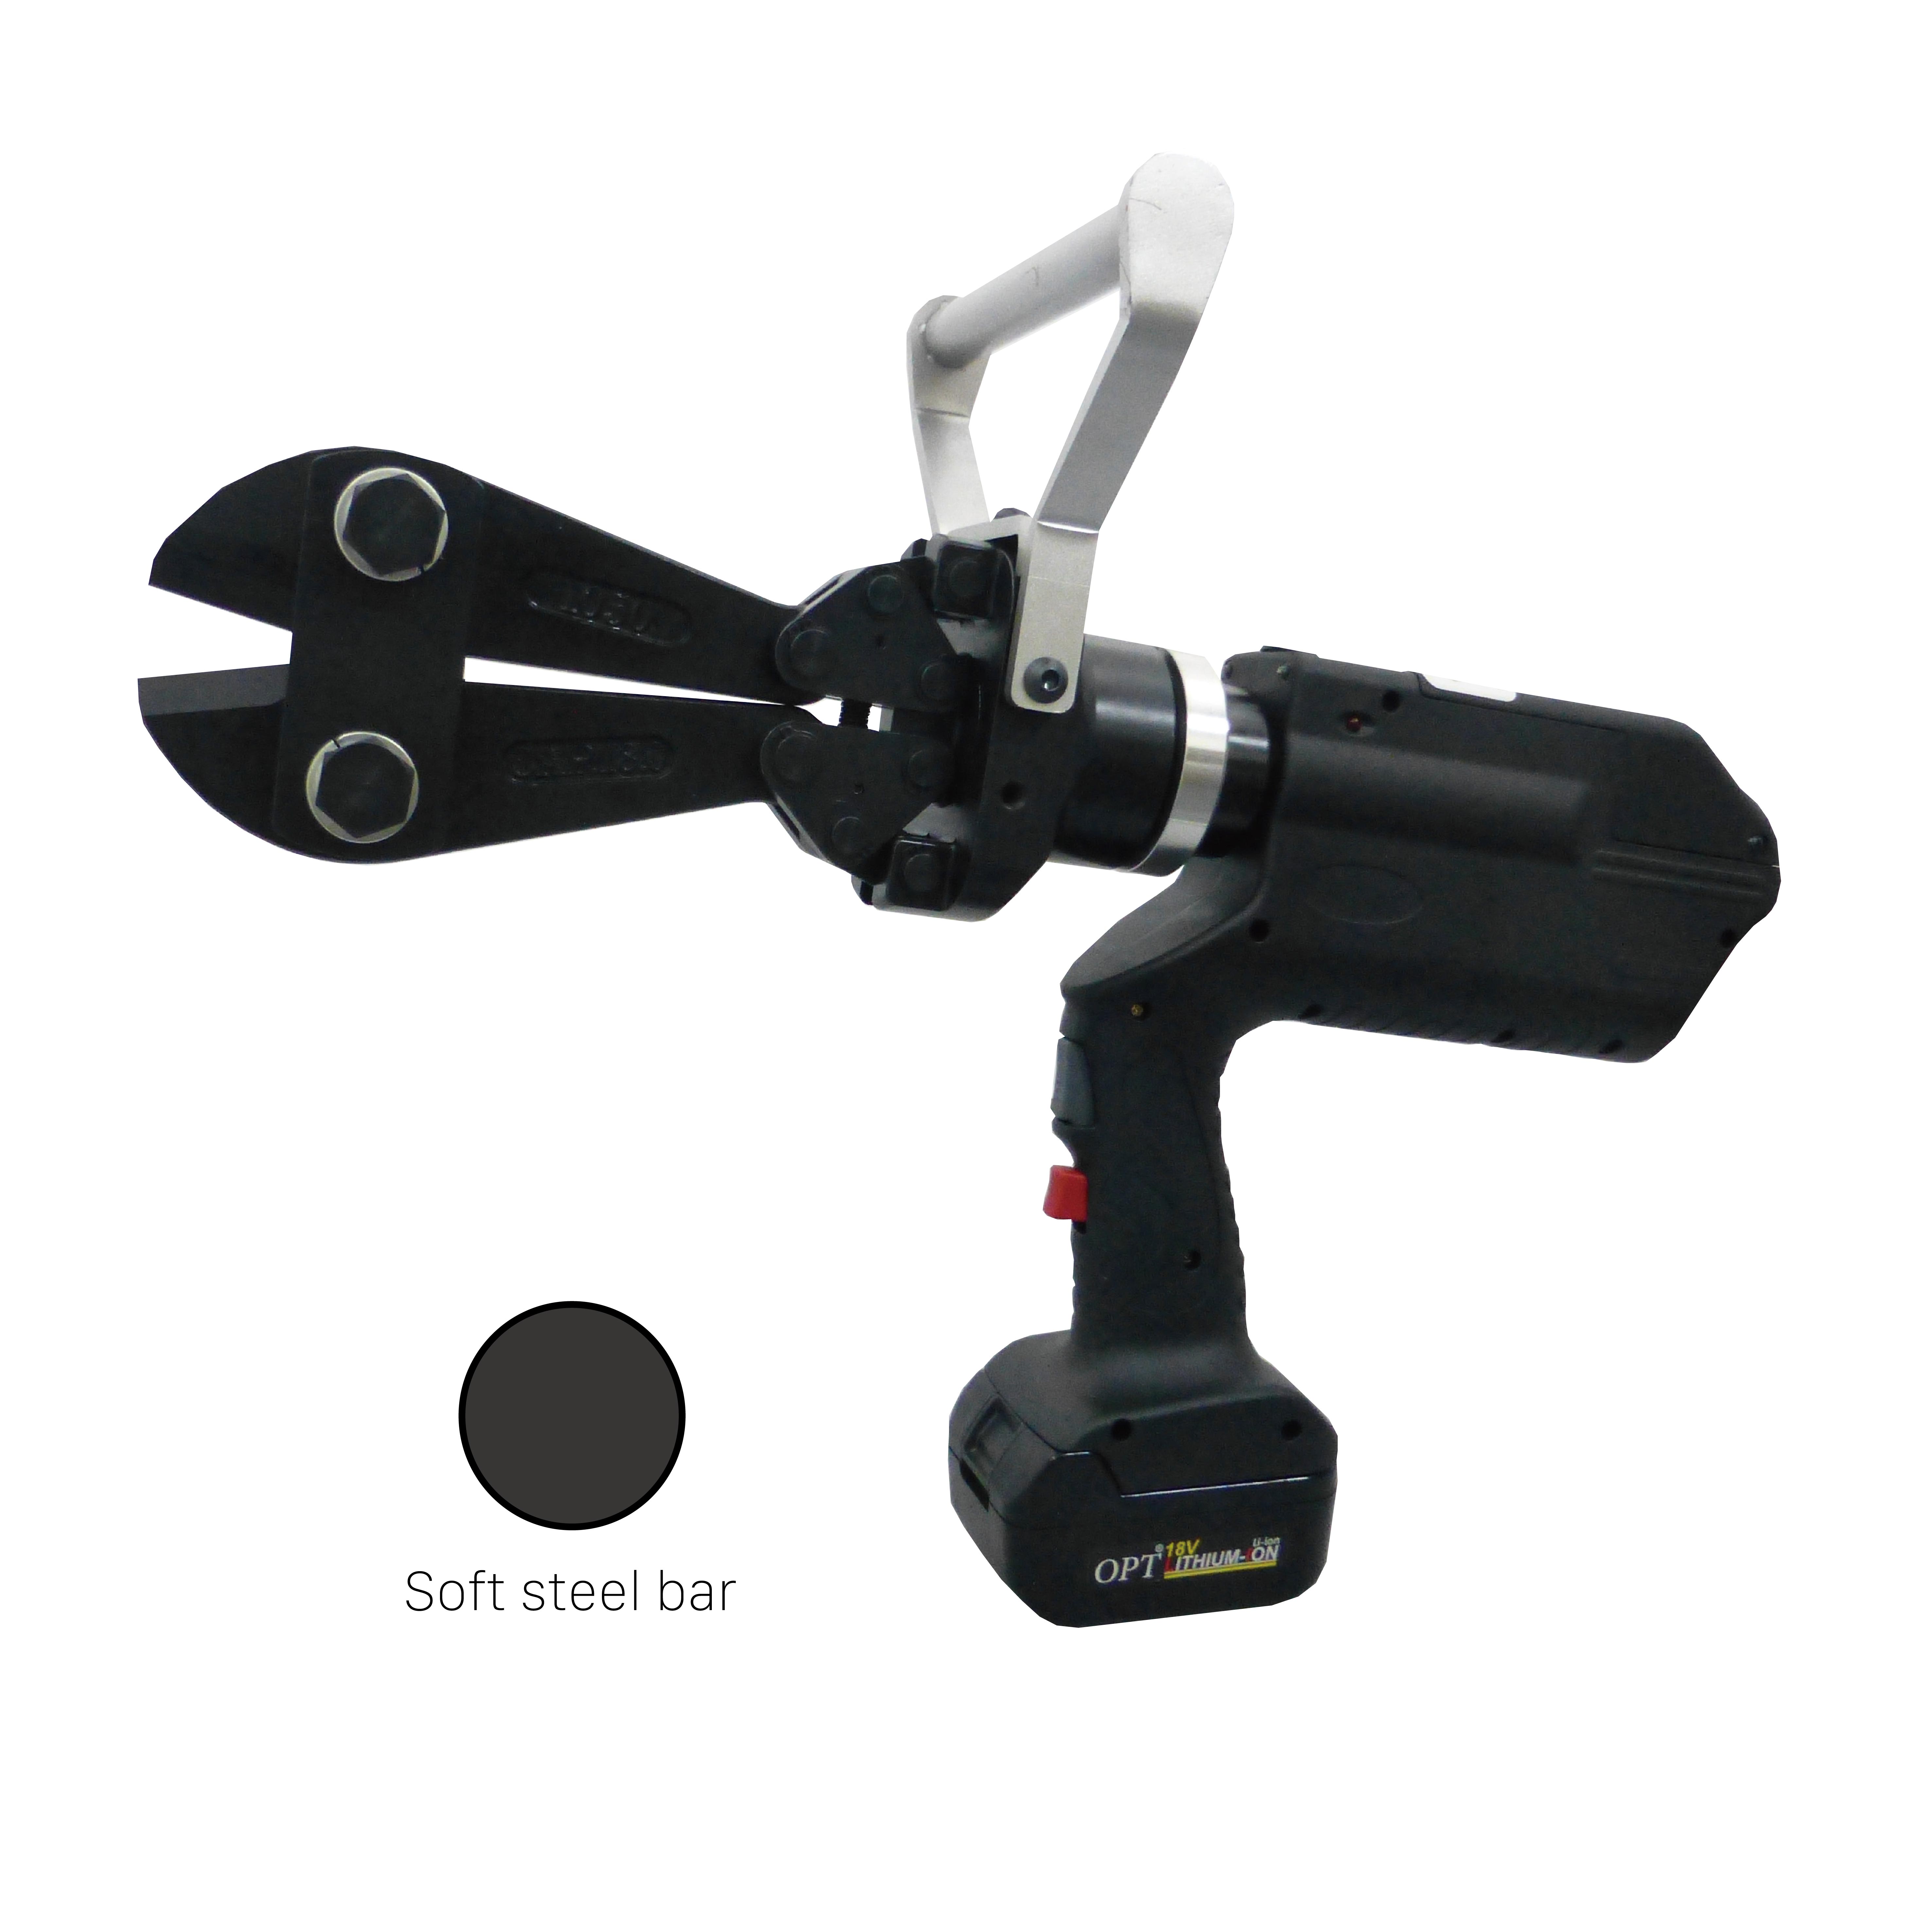 CORDLESS HYDRAULIC CABLE CUTTERS